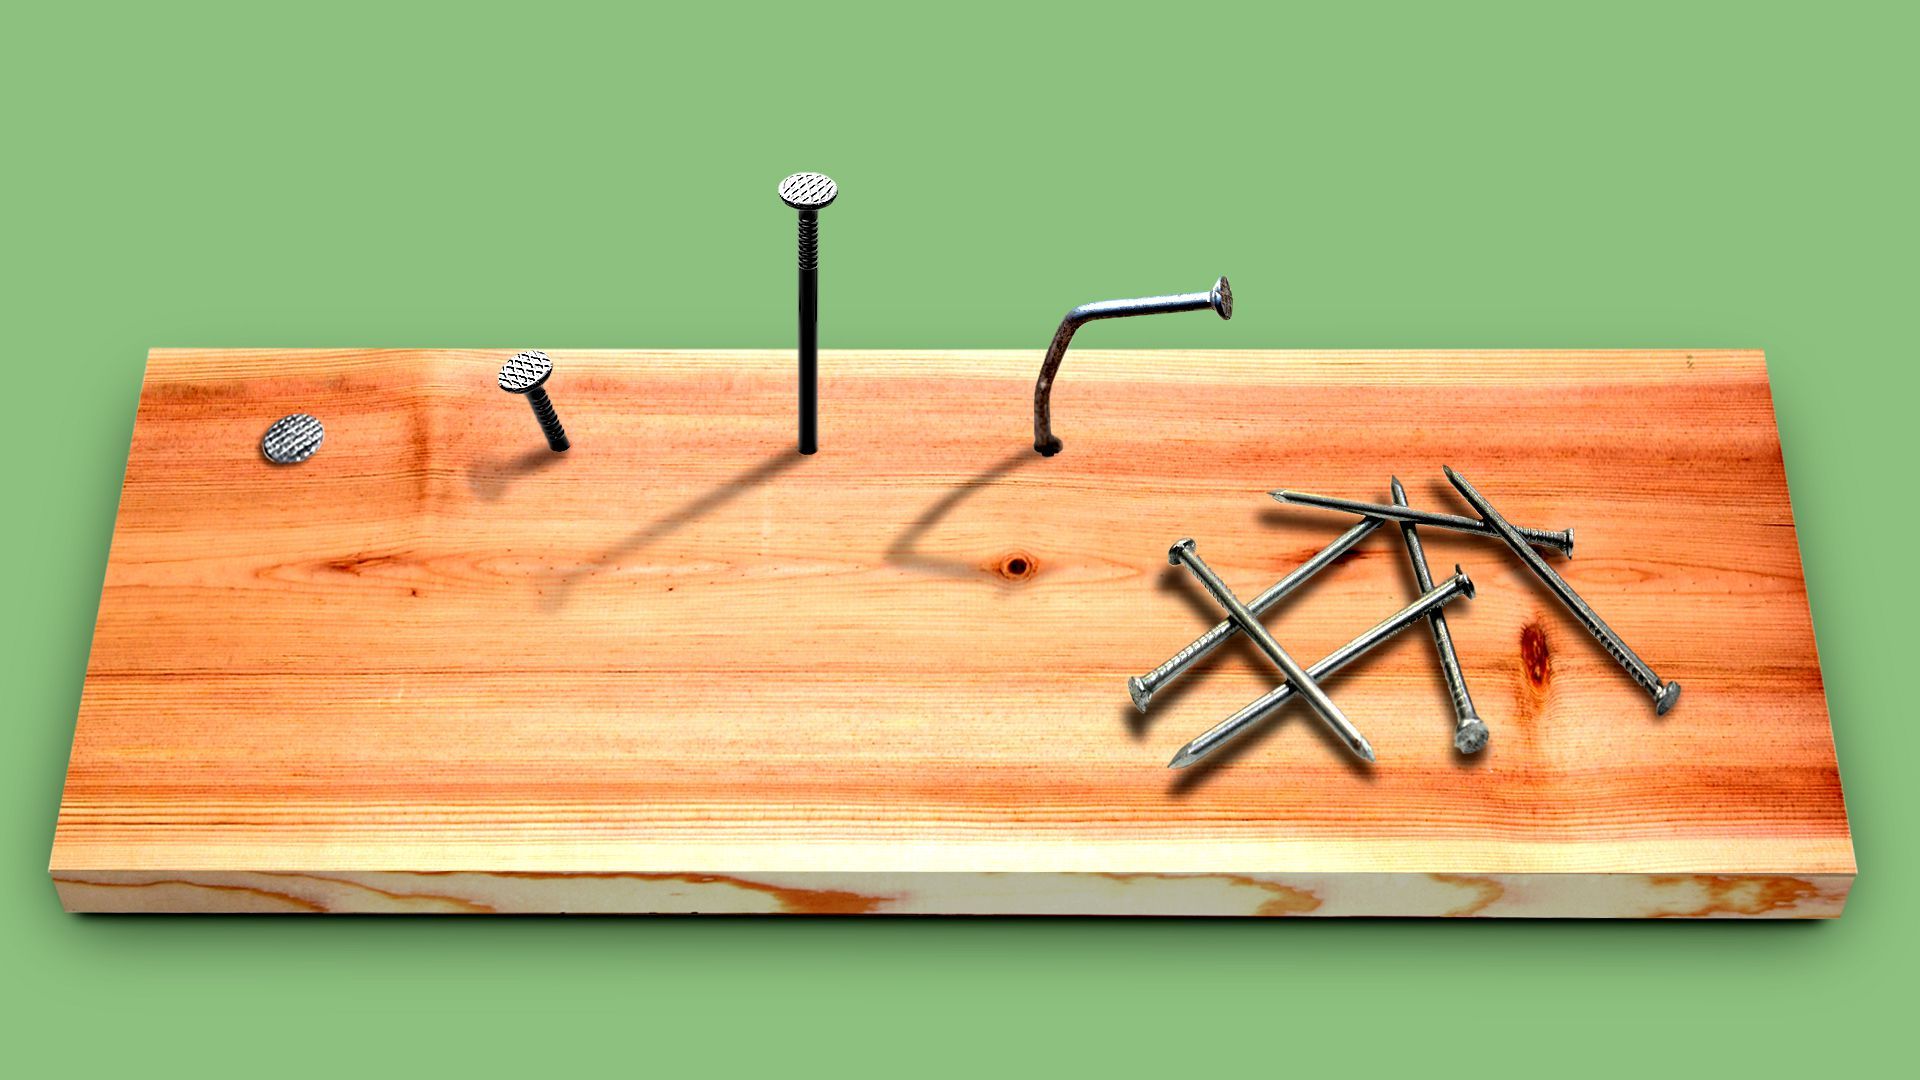 Illustration of nails and a wooden plank, with some nails hammered fully in and other nails laying down unused